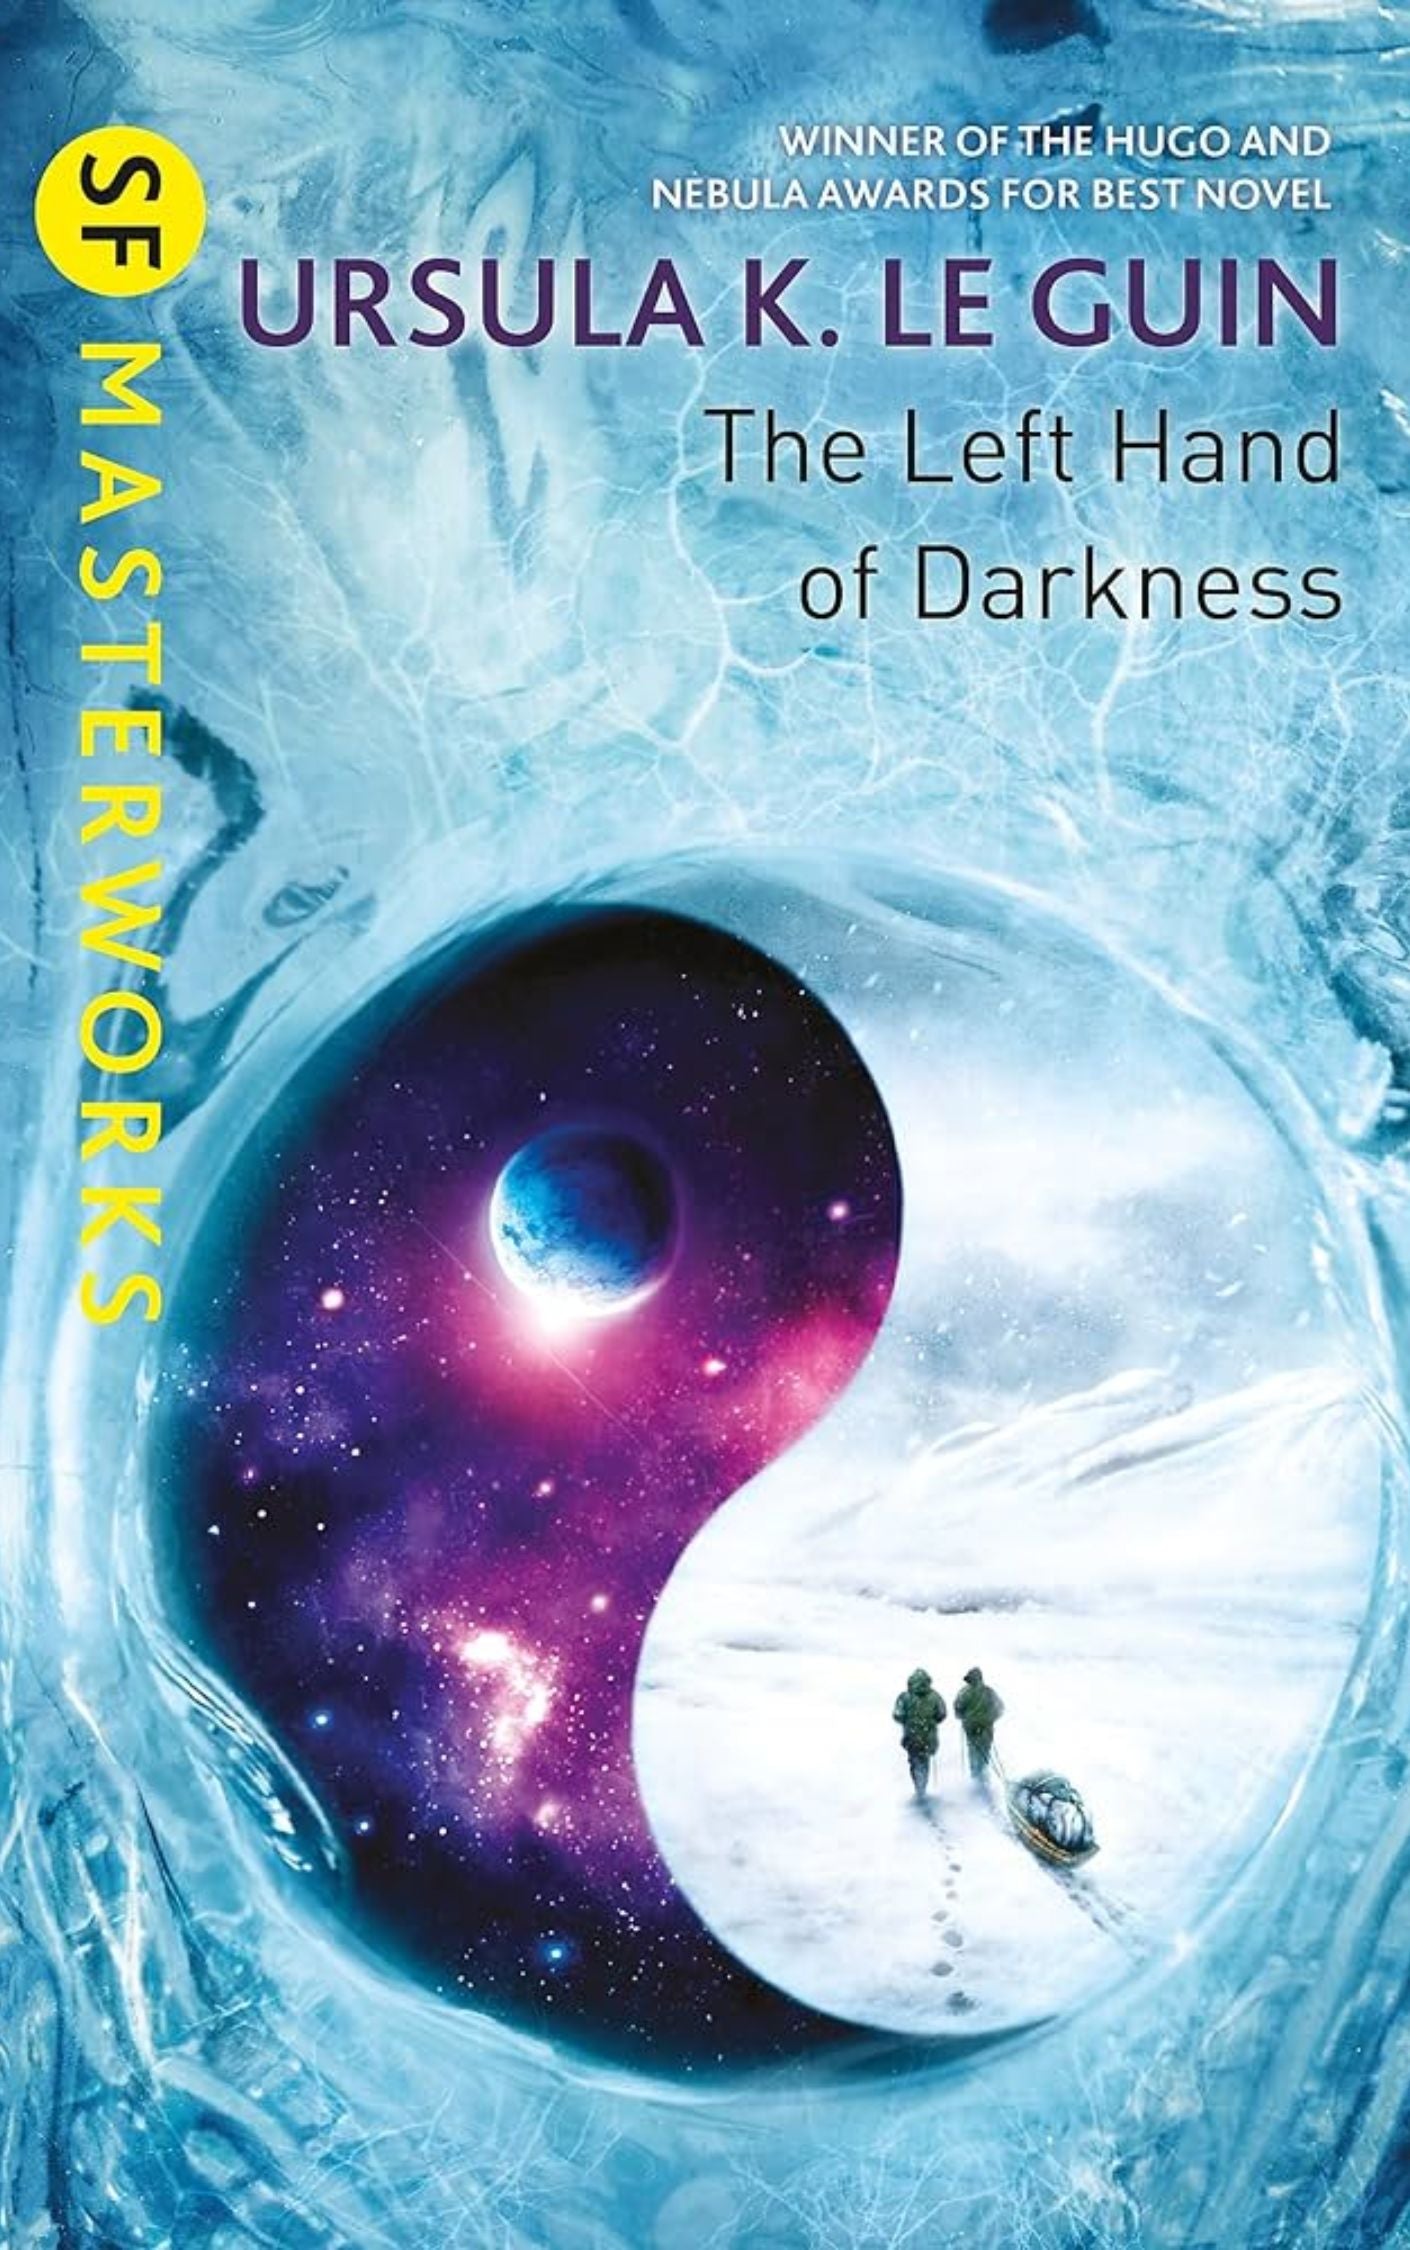 "The Left Hand of Darkness" by Ursula K. Le Guin: Books For Women